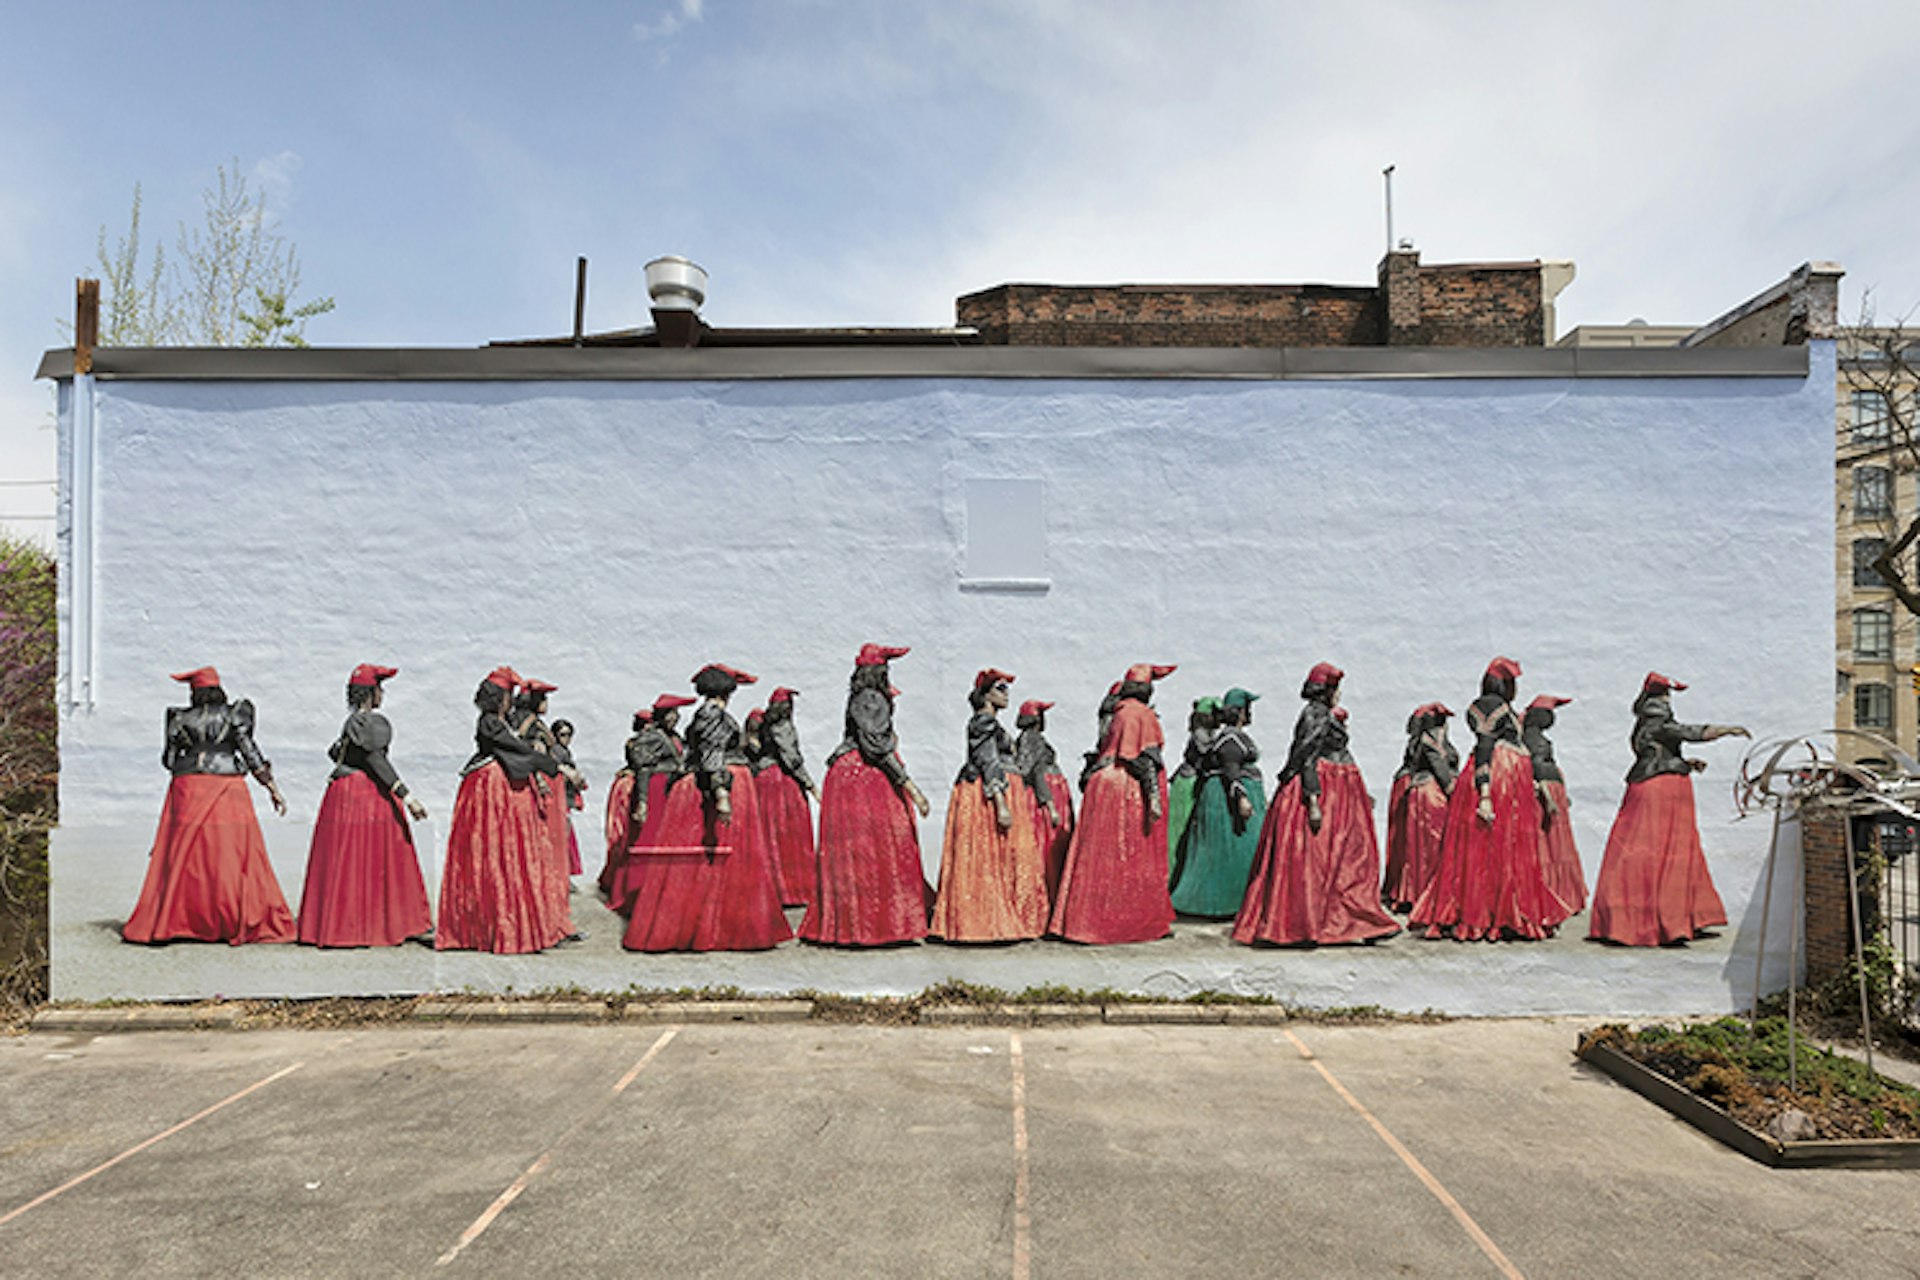 Mural at Museum of Contemporary Canadian Art. Courtyard mural installation with Jim Naughten, Herero Women Marching, 2012. Photo: Toni Hafkenscheid